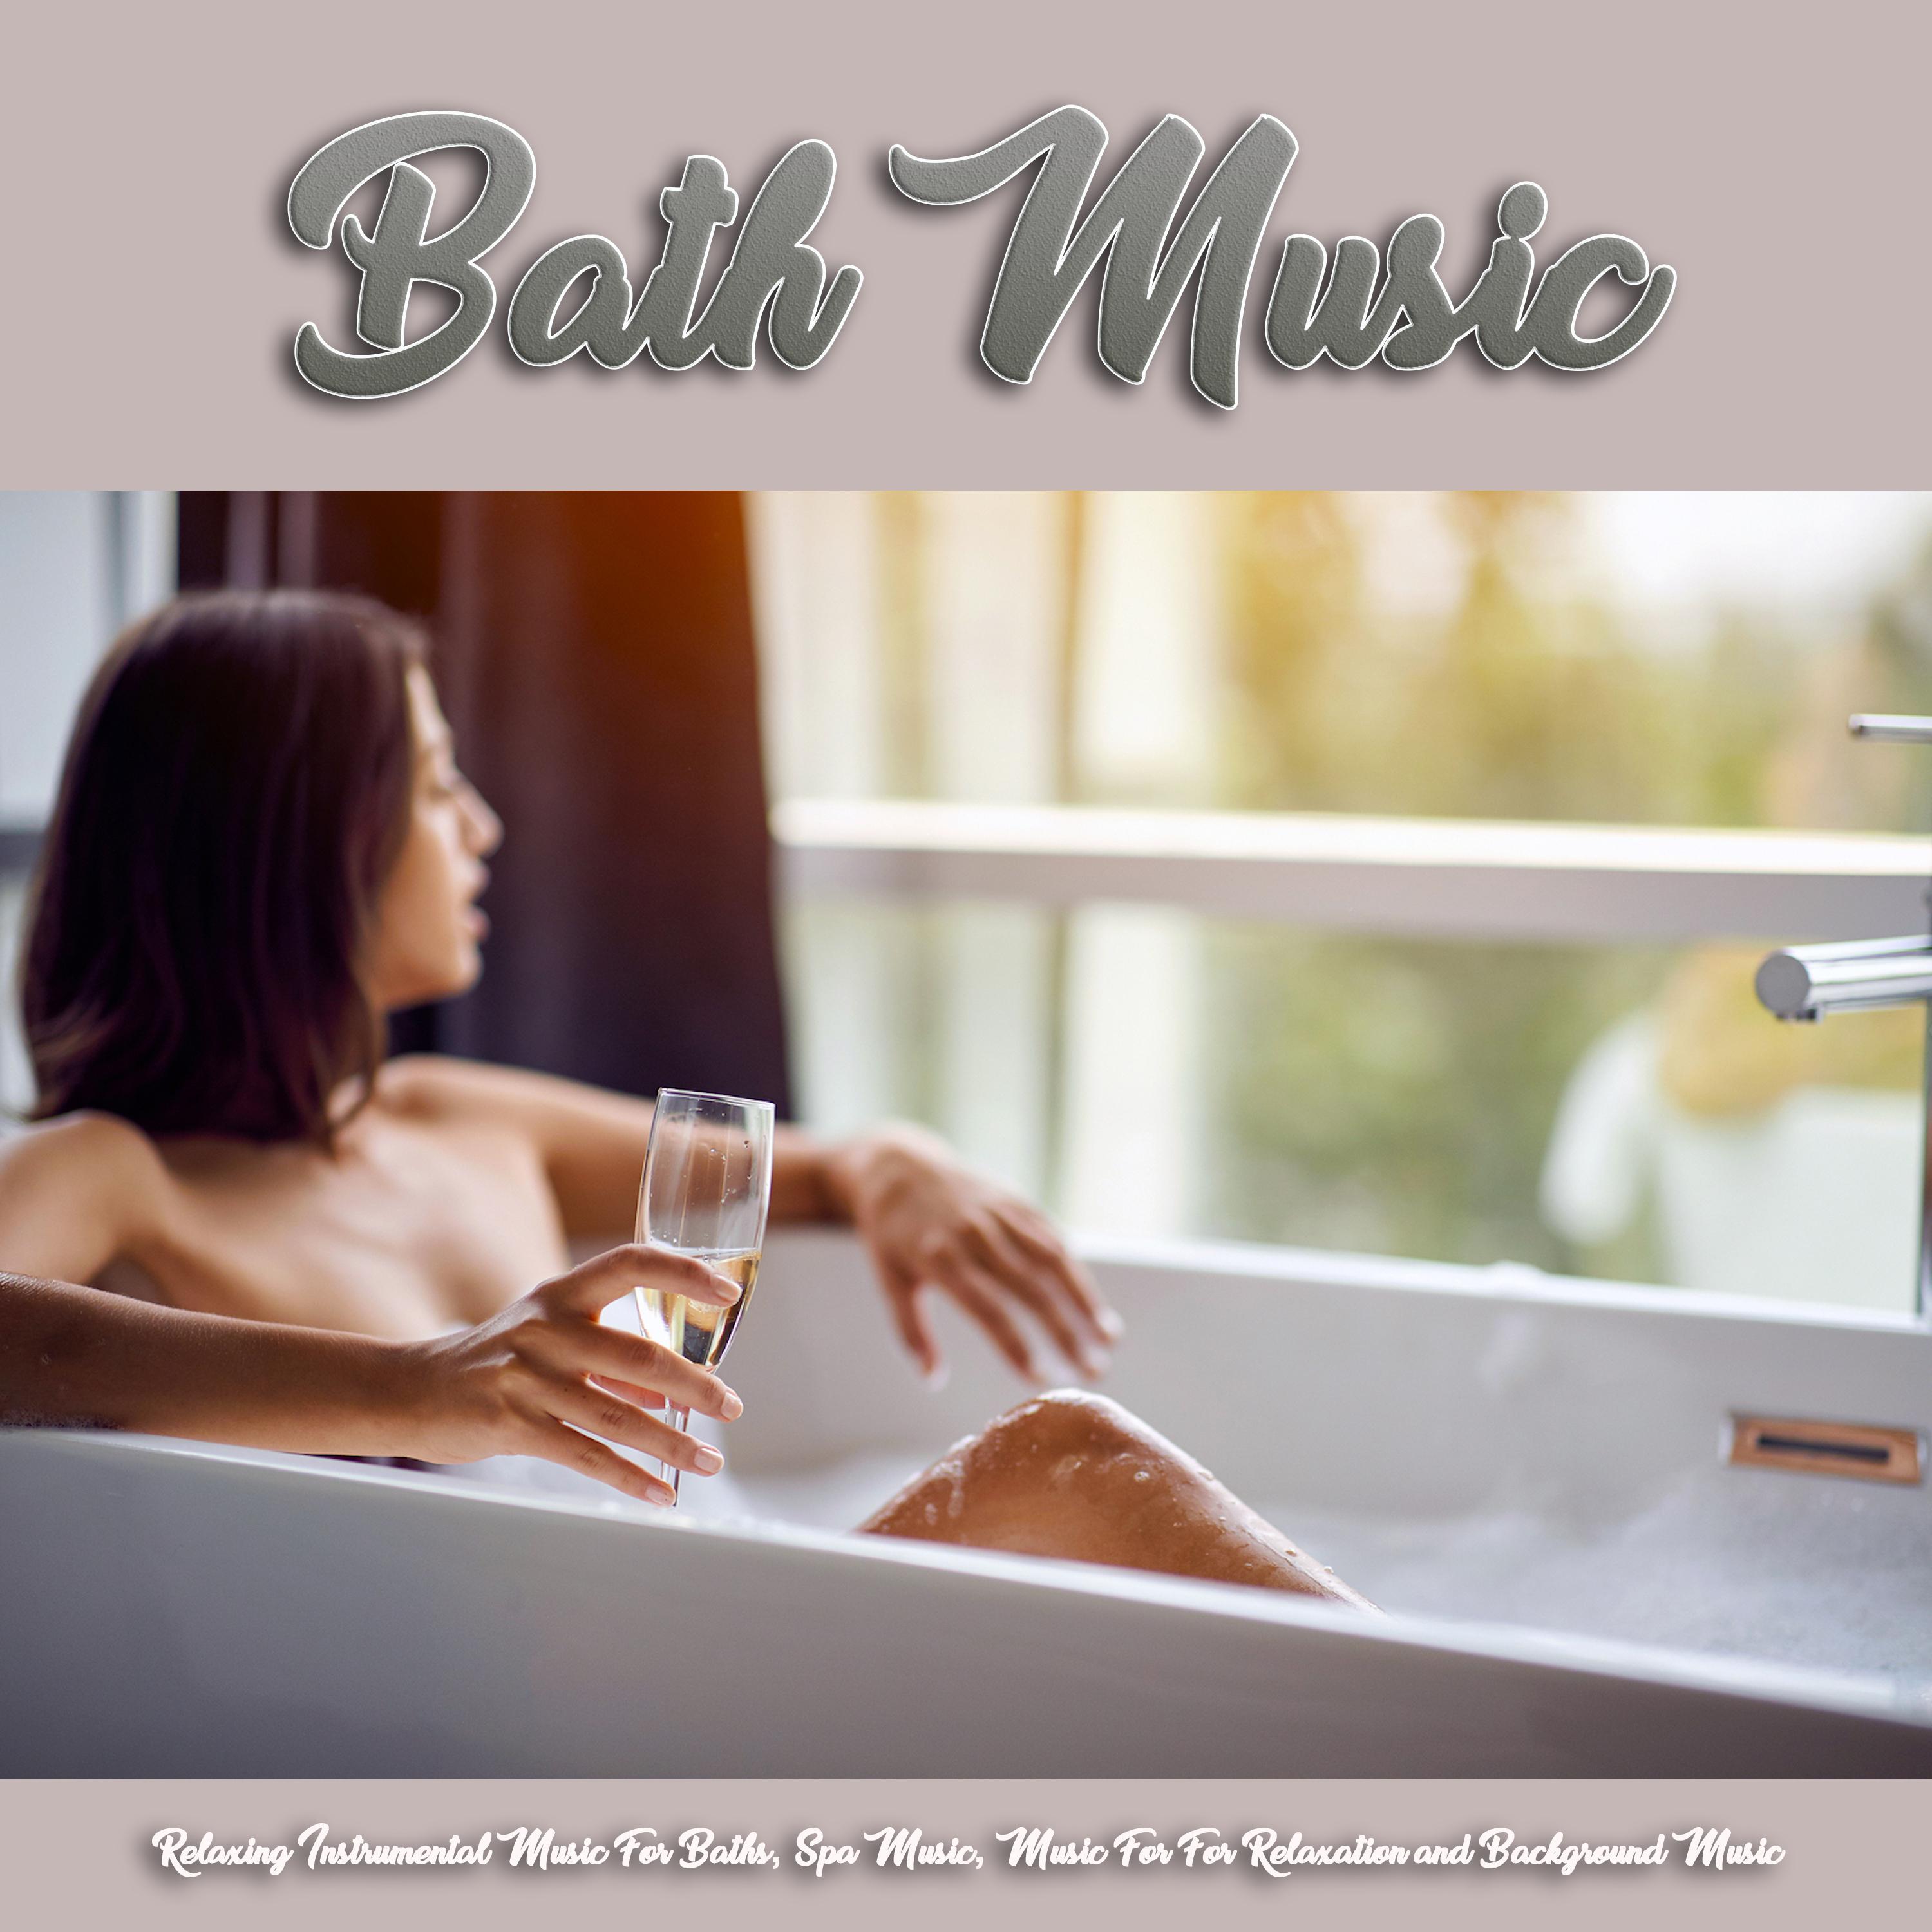 Bathtime Music and Relaxing Music